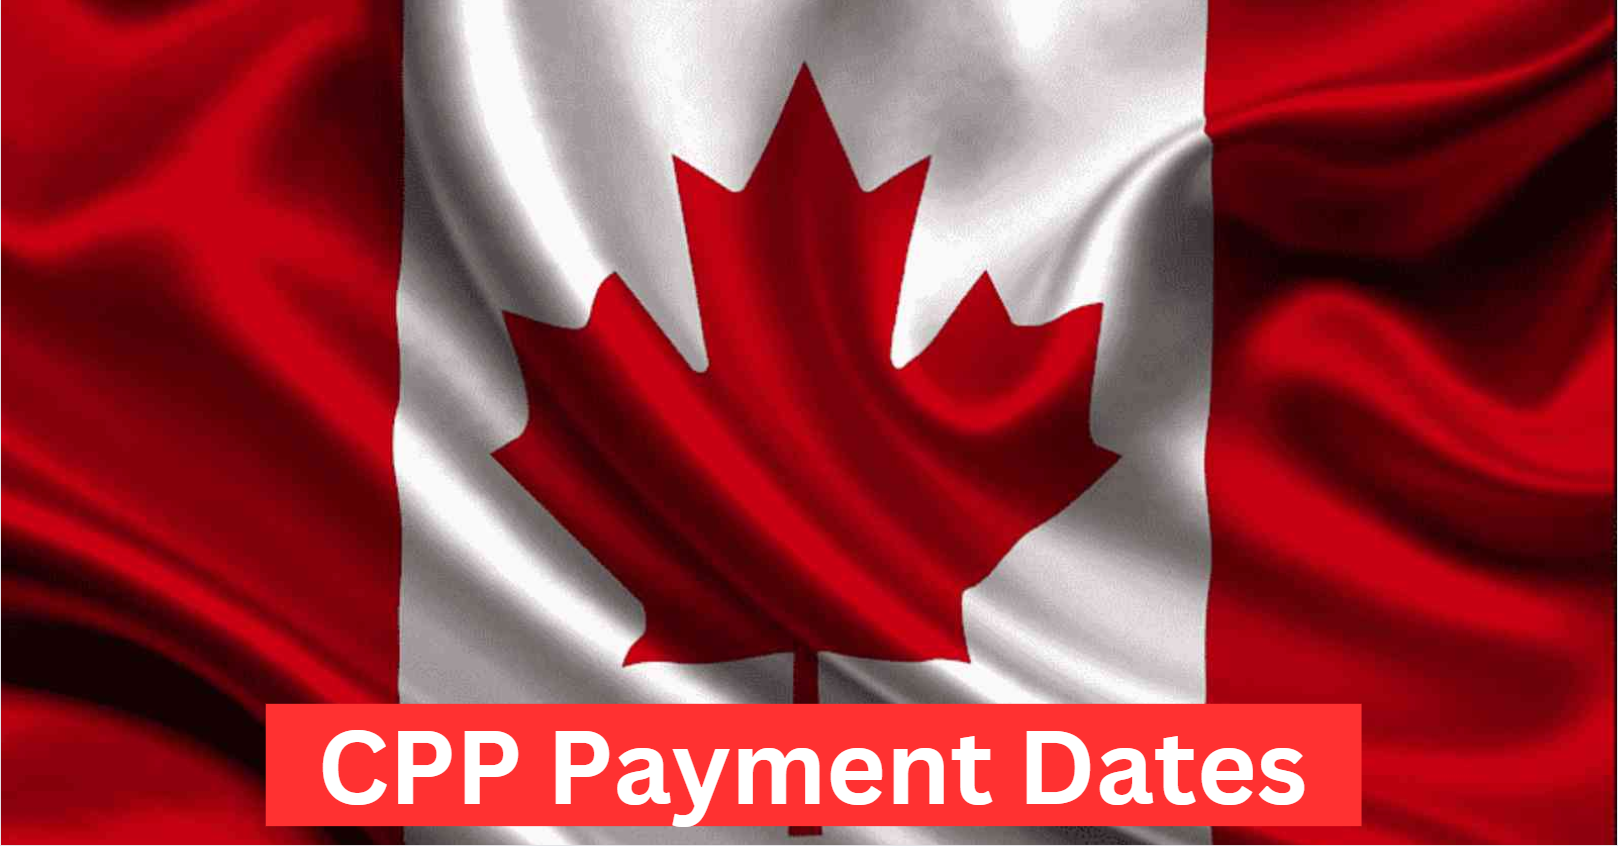 CPP Payment Dates